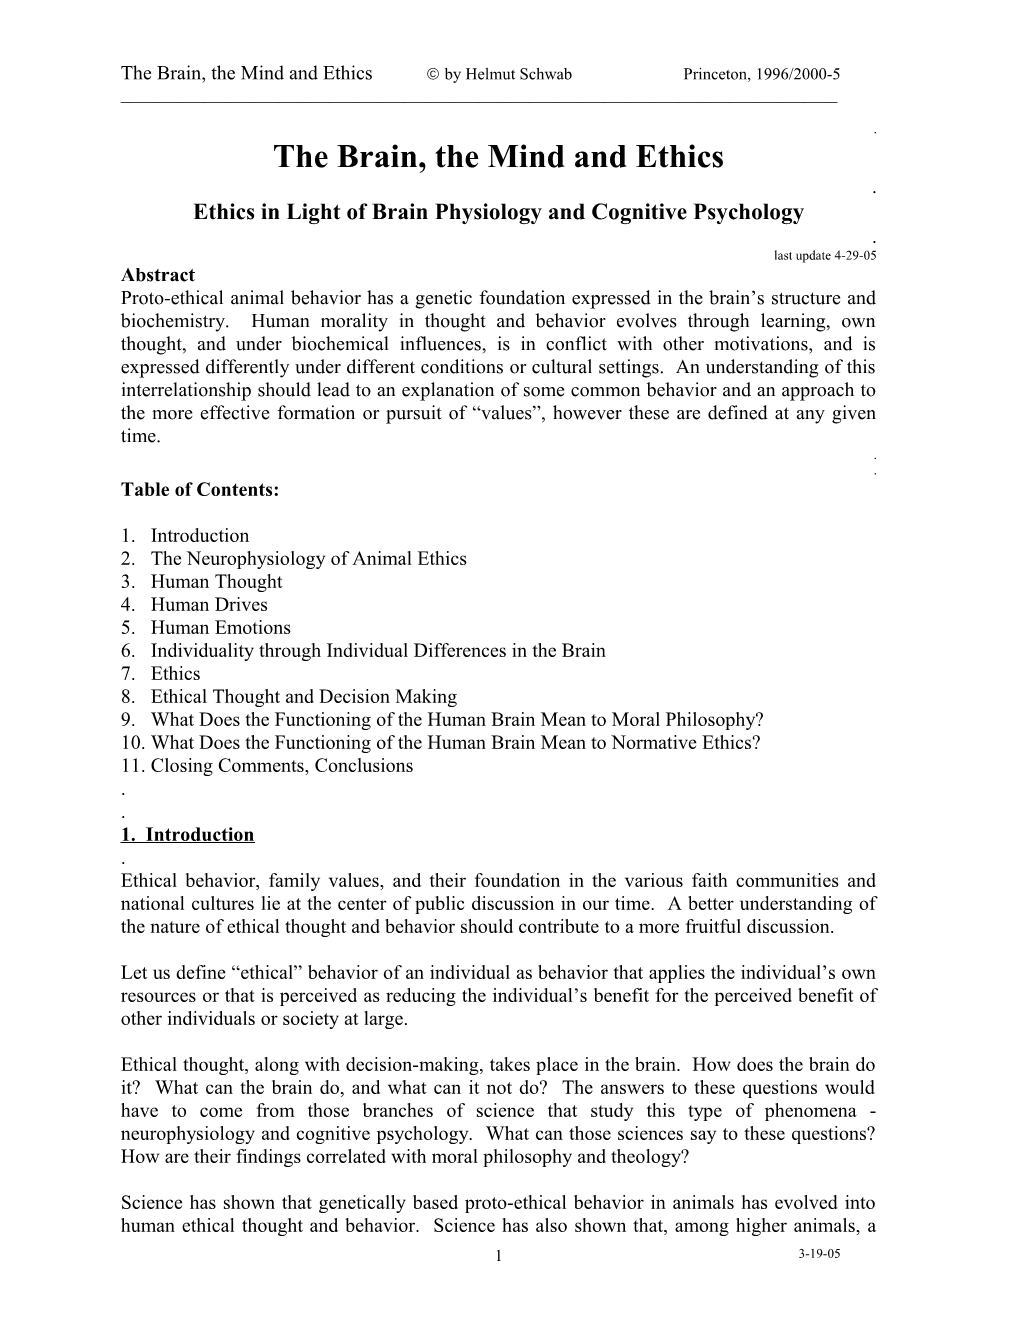 Brain, Mind: the Mind and Ethics - Brain Phsyiology, Cognitive Psychology